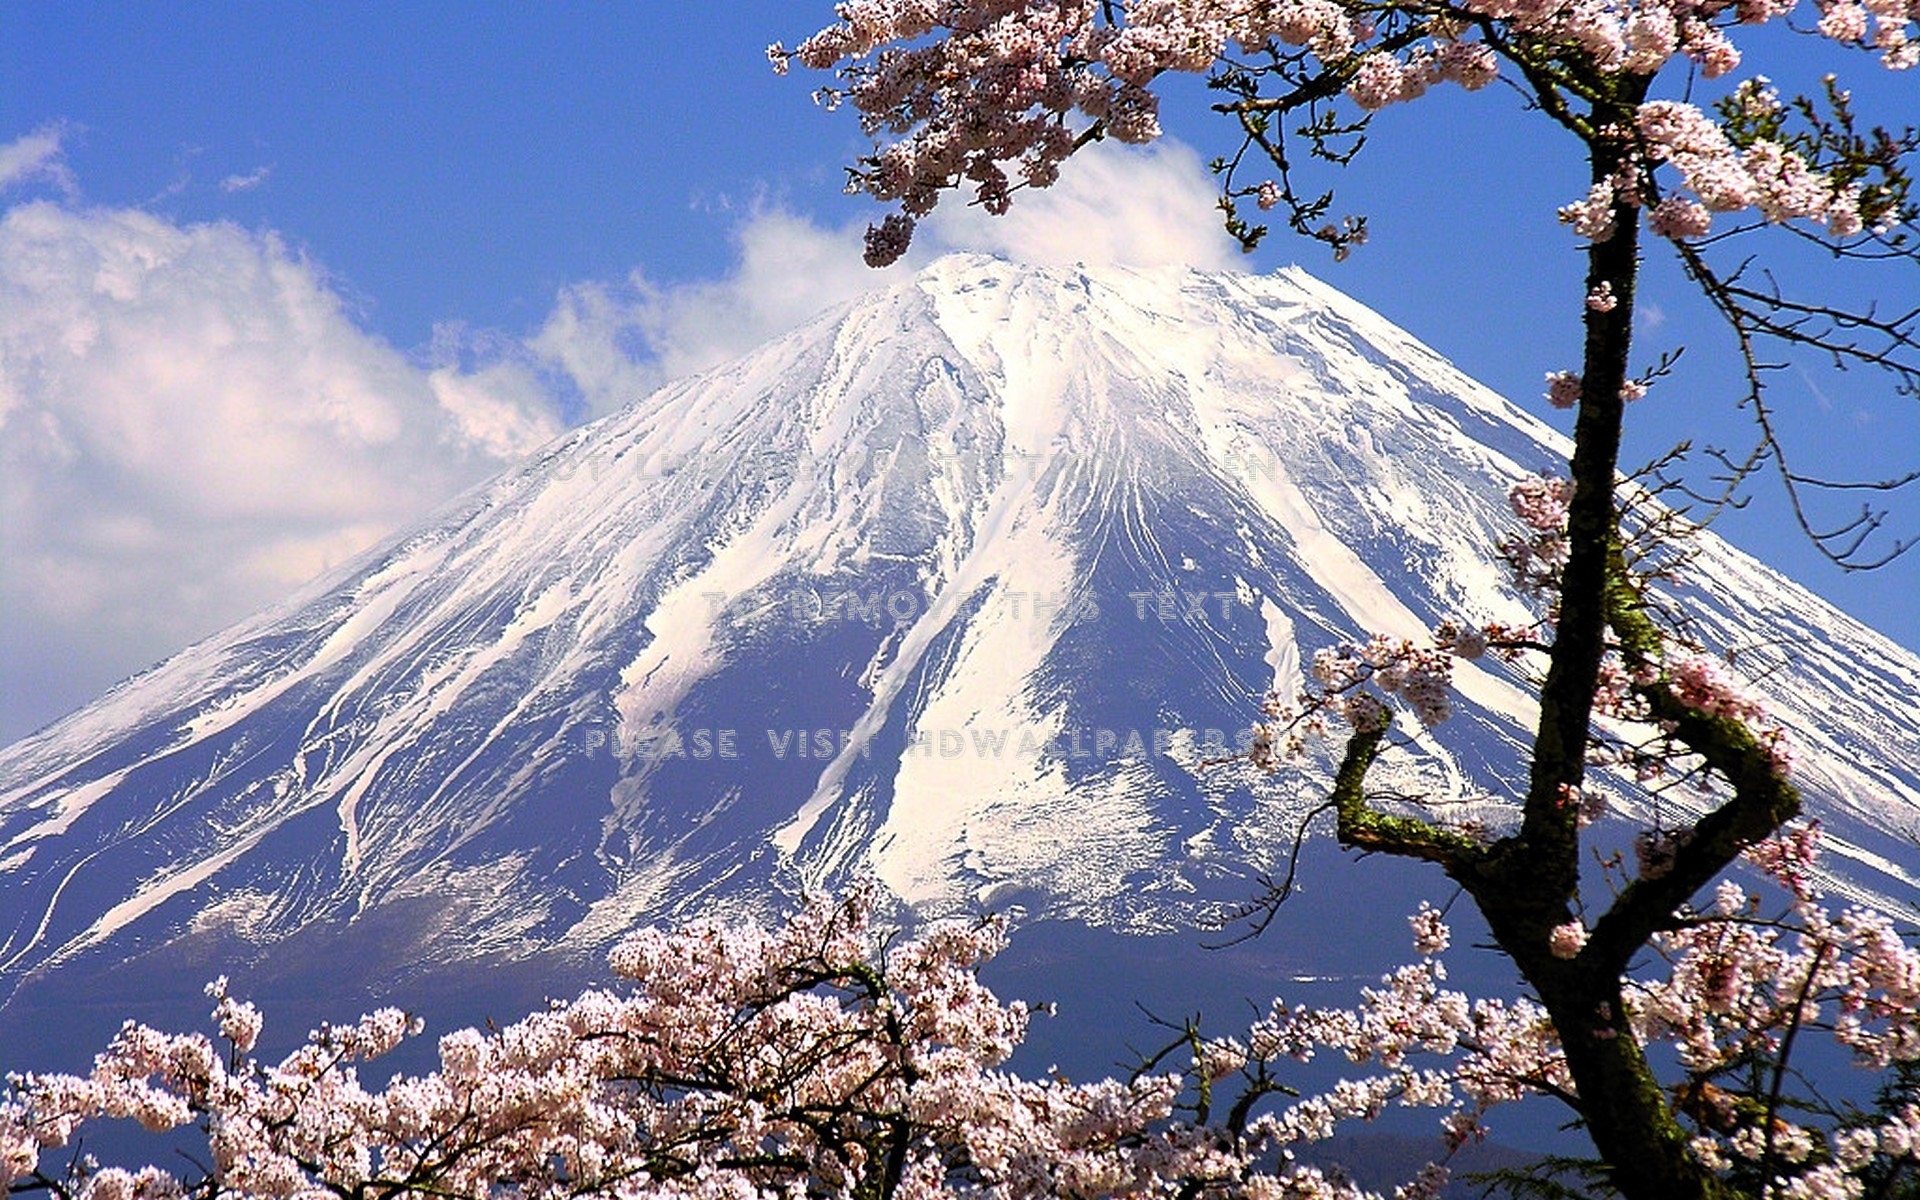 Mount Fuji Framed By Cherry Blossoms Trees